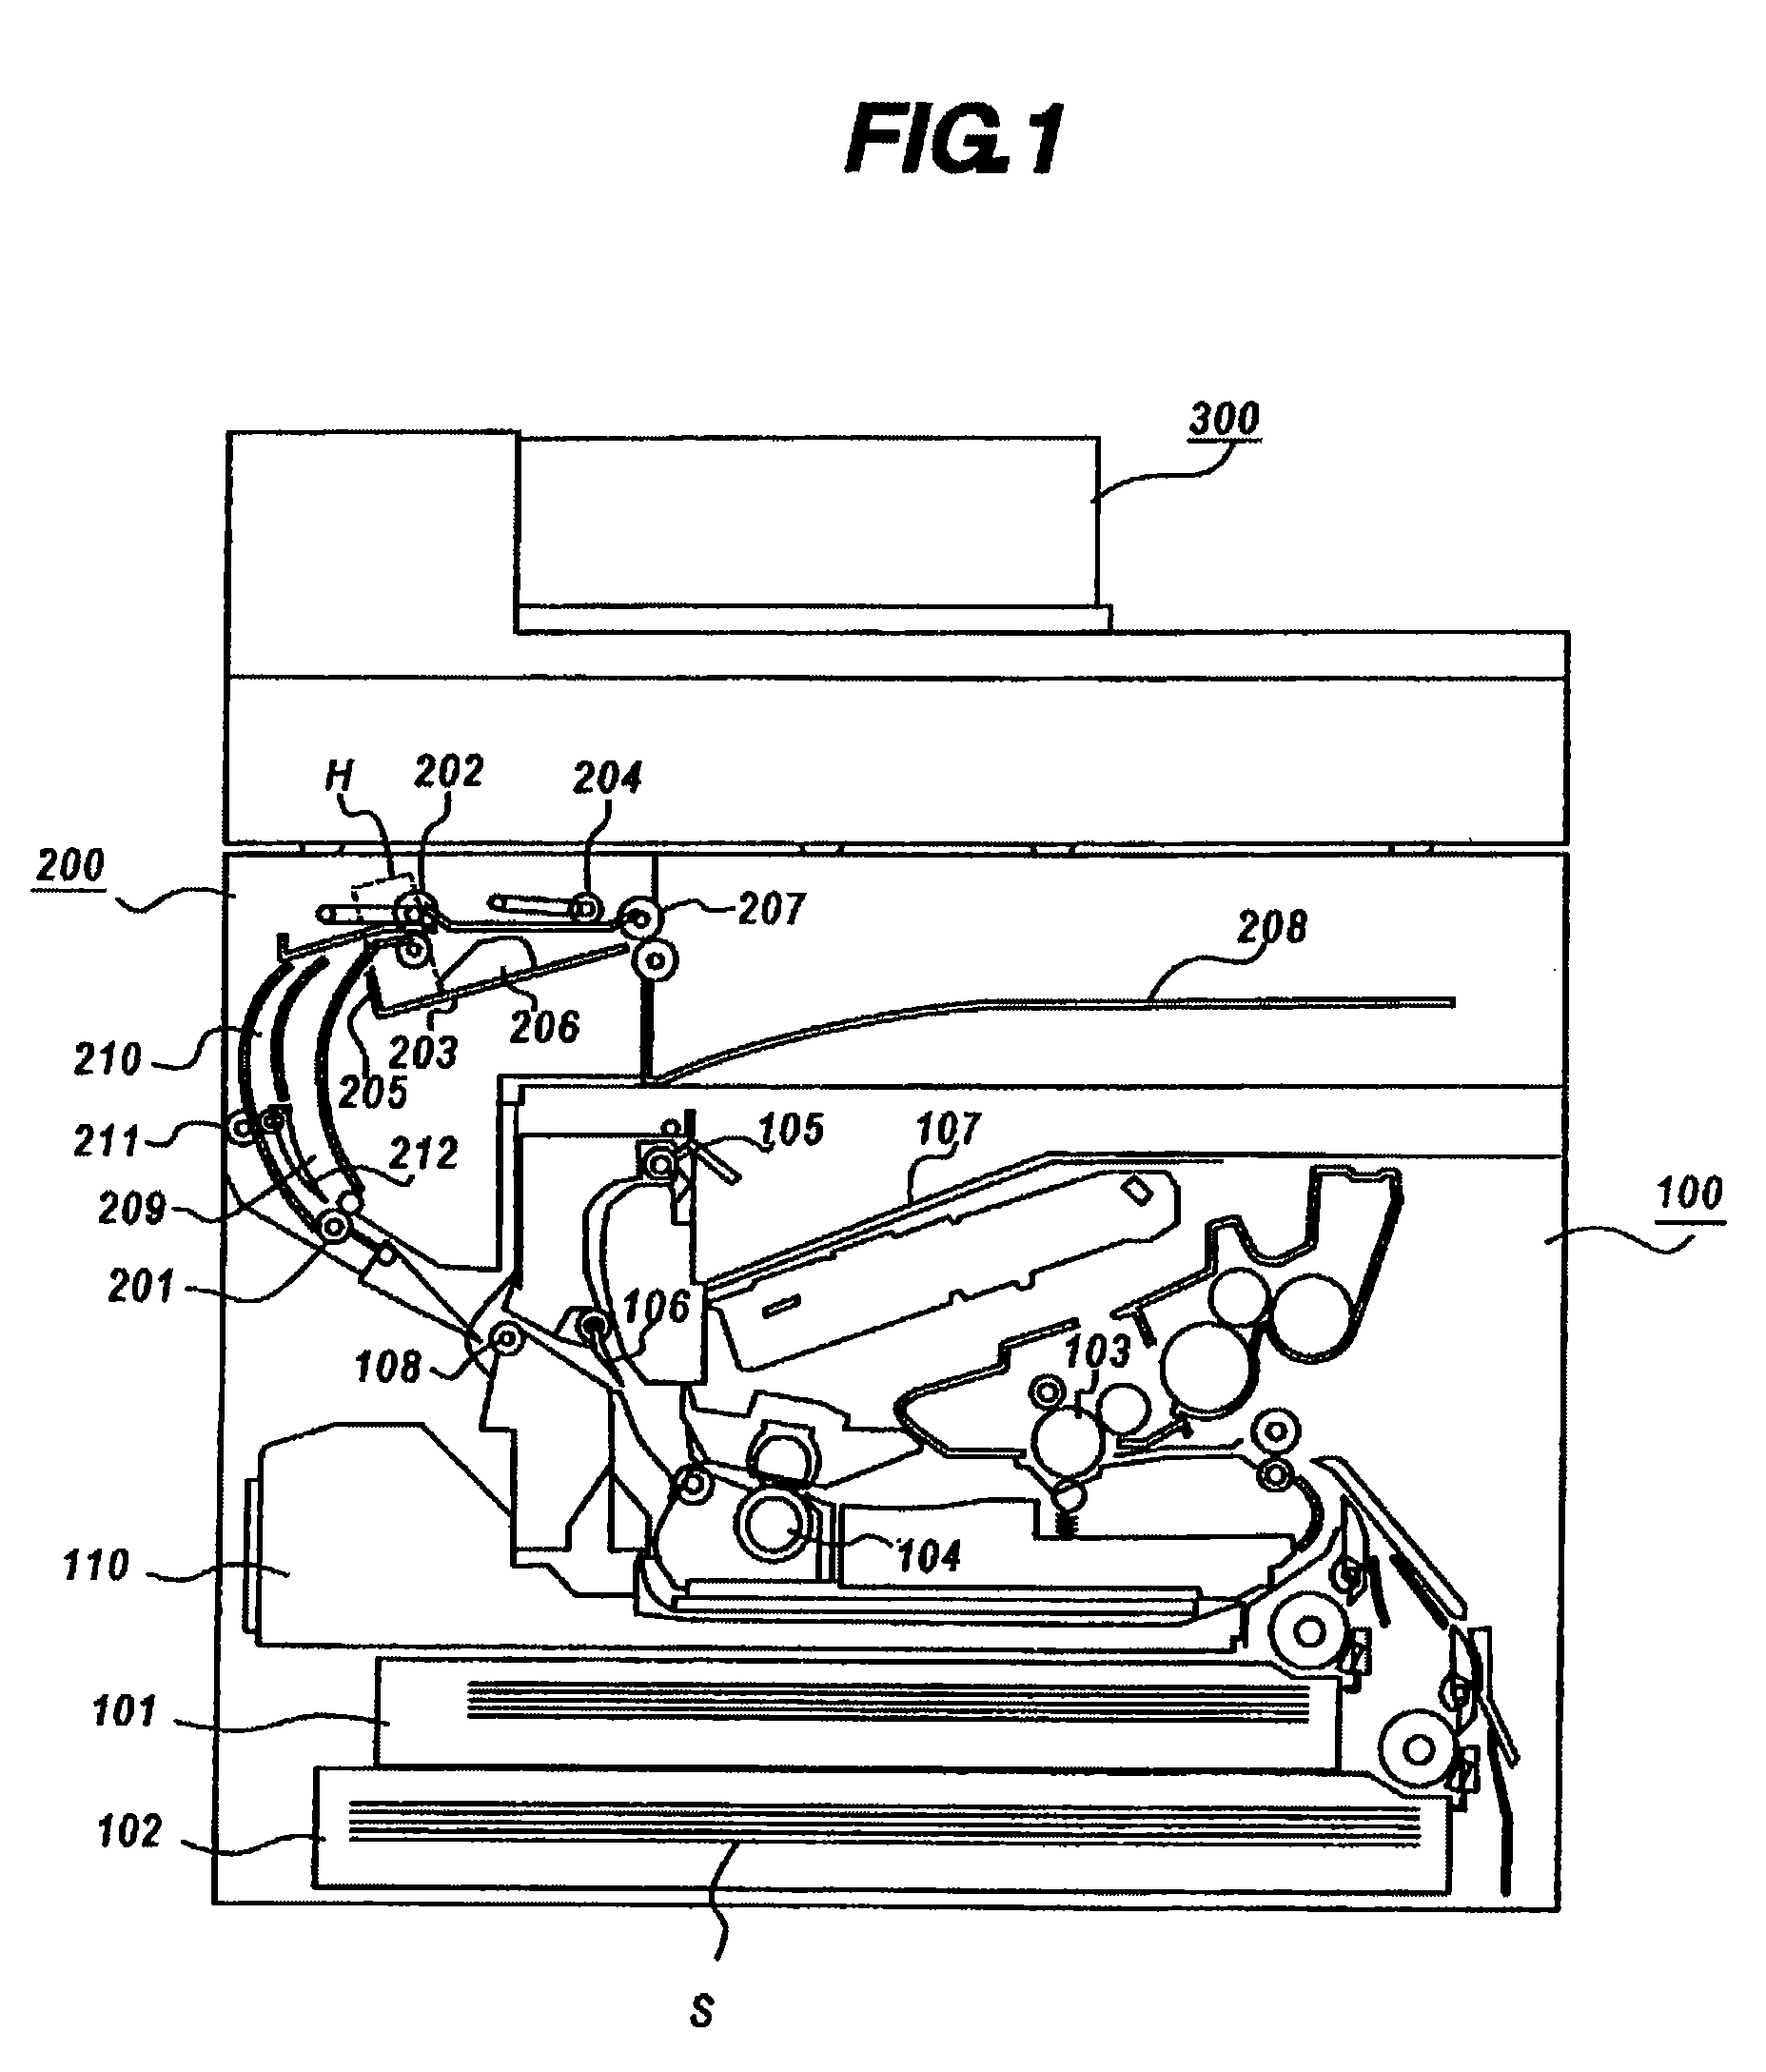 Sheet processing apparatus with branching paths for post-processing